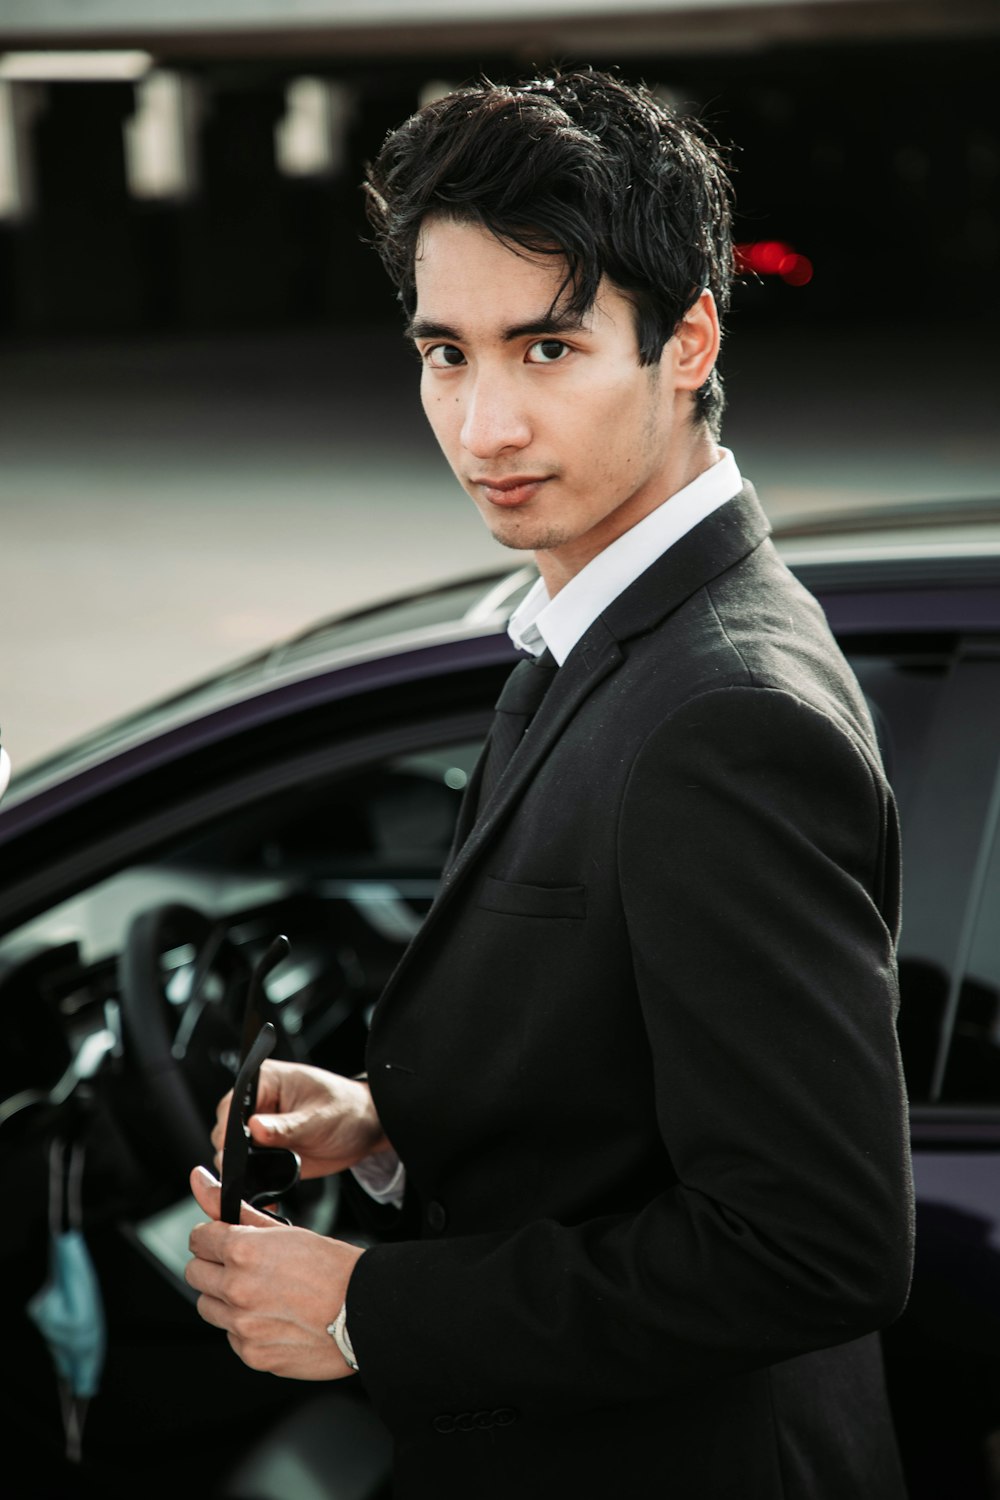 a man in a suit holding a car key